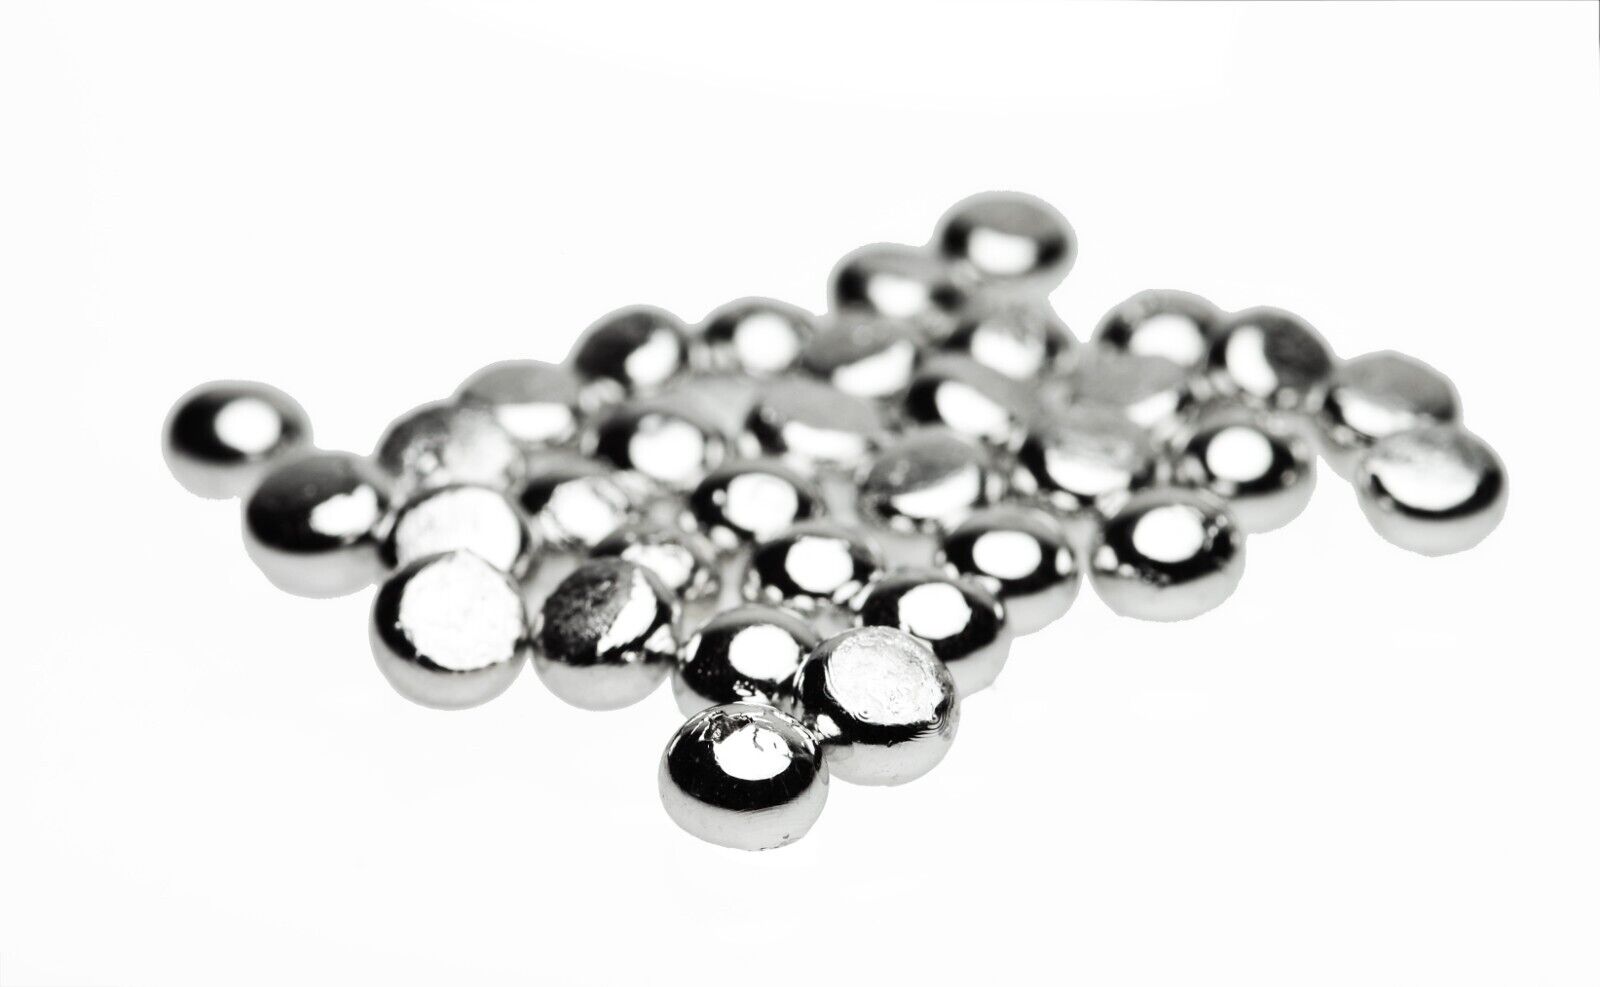 Ruthenium Metal 1 Gram Bead 99.95% for Element Collection USA SHIPPING